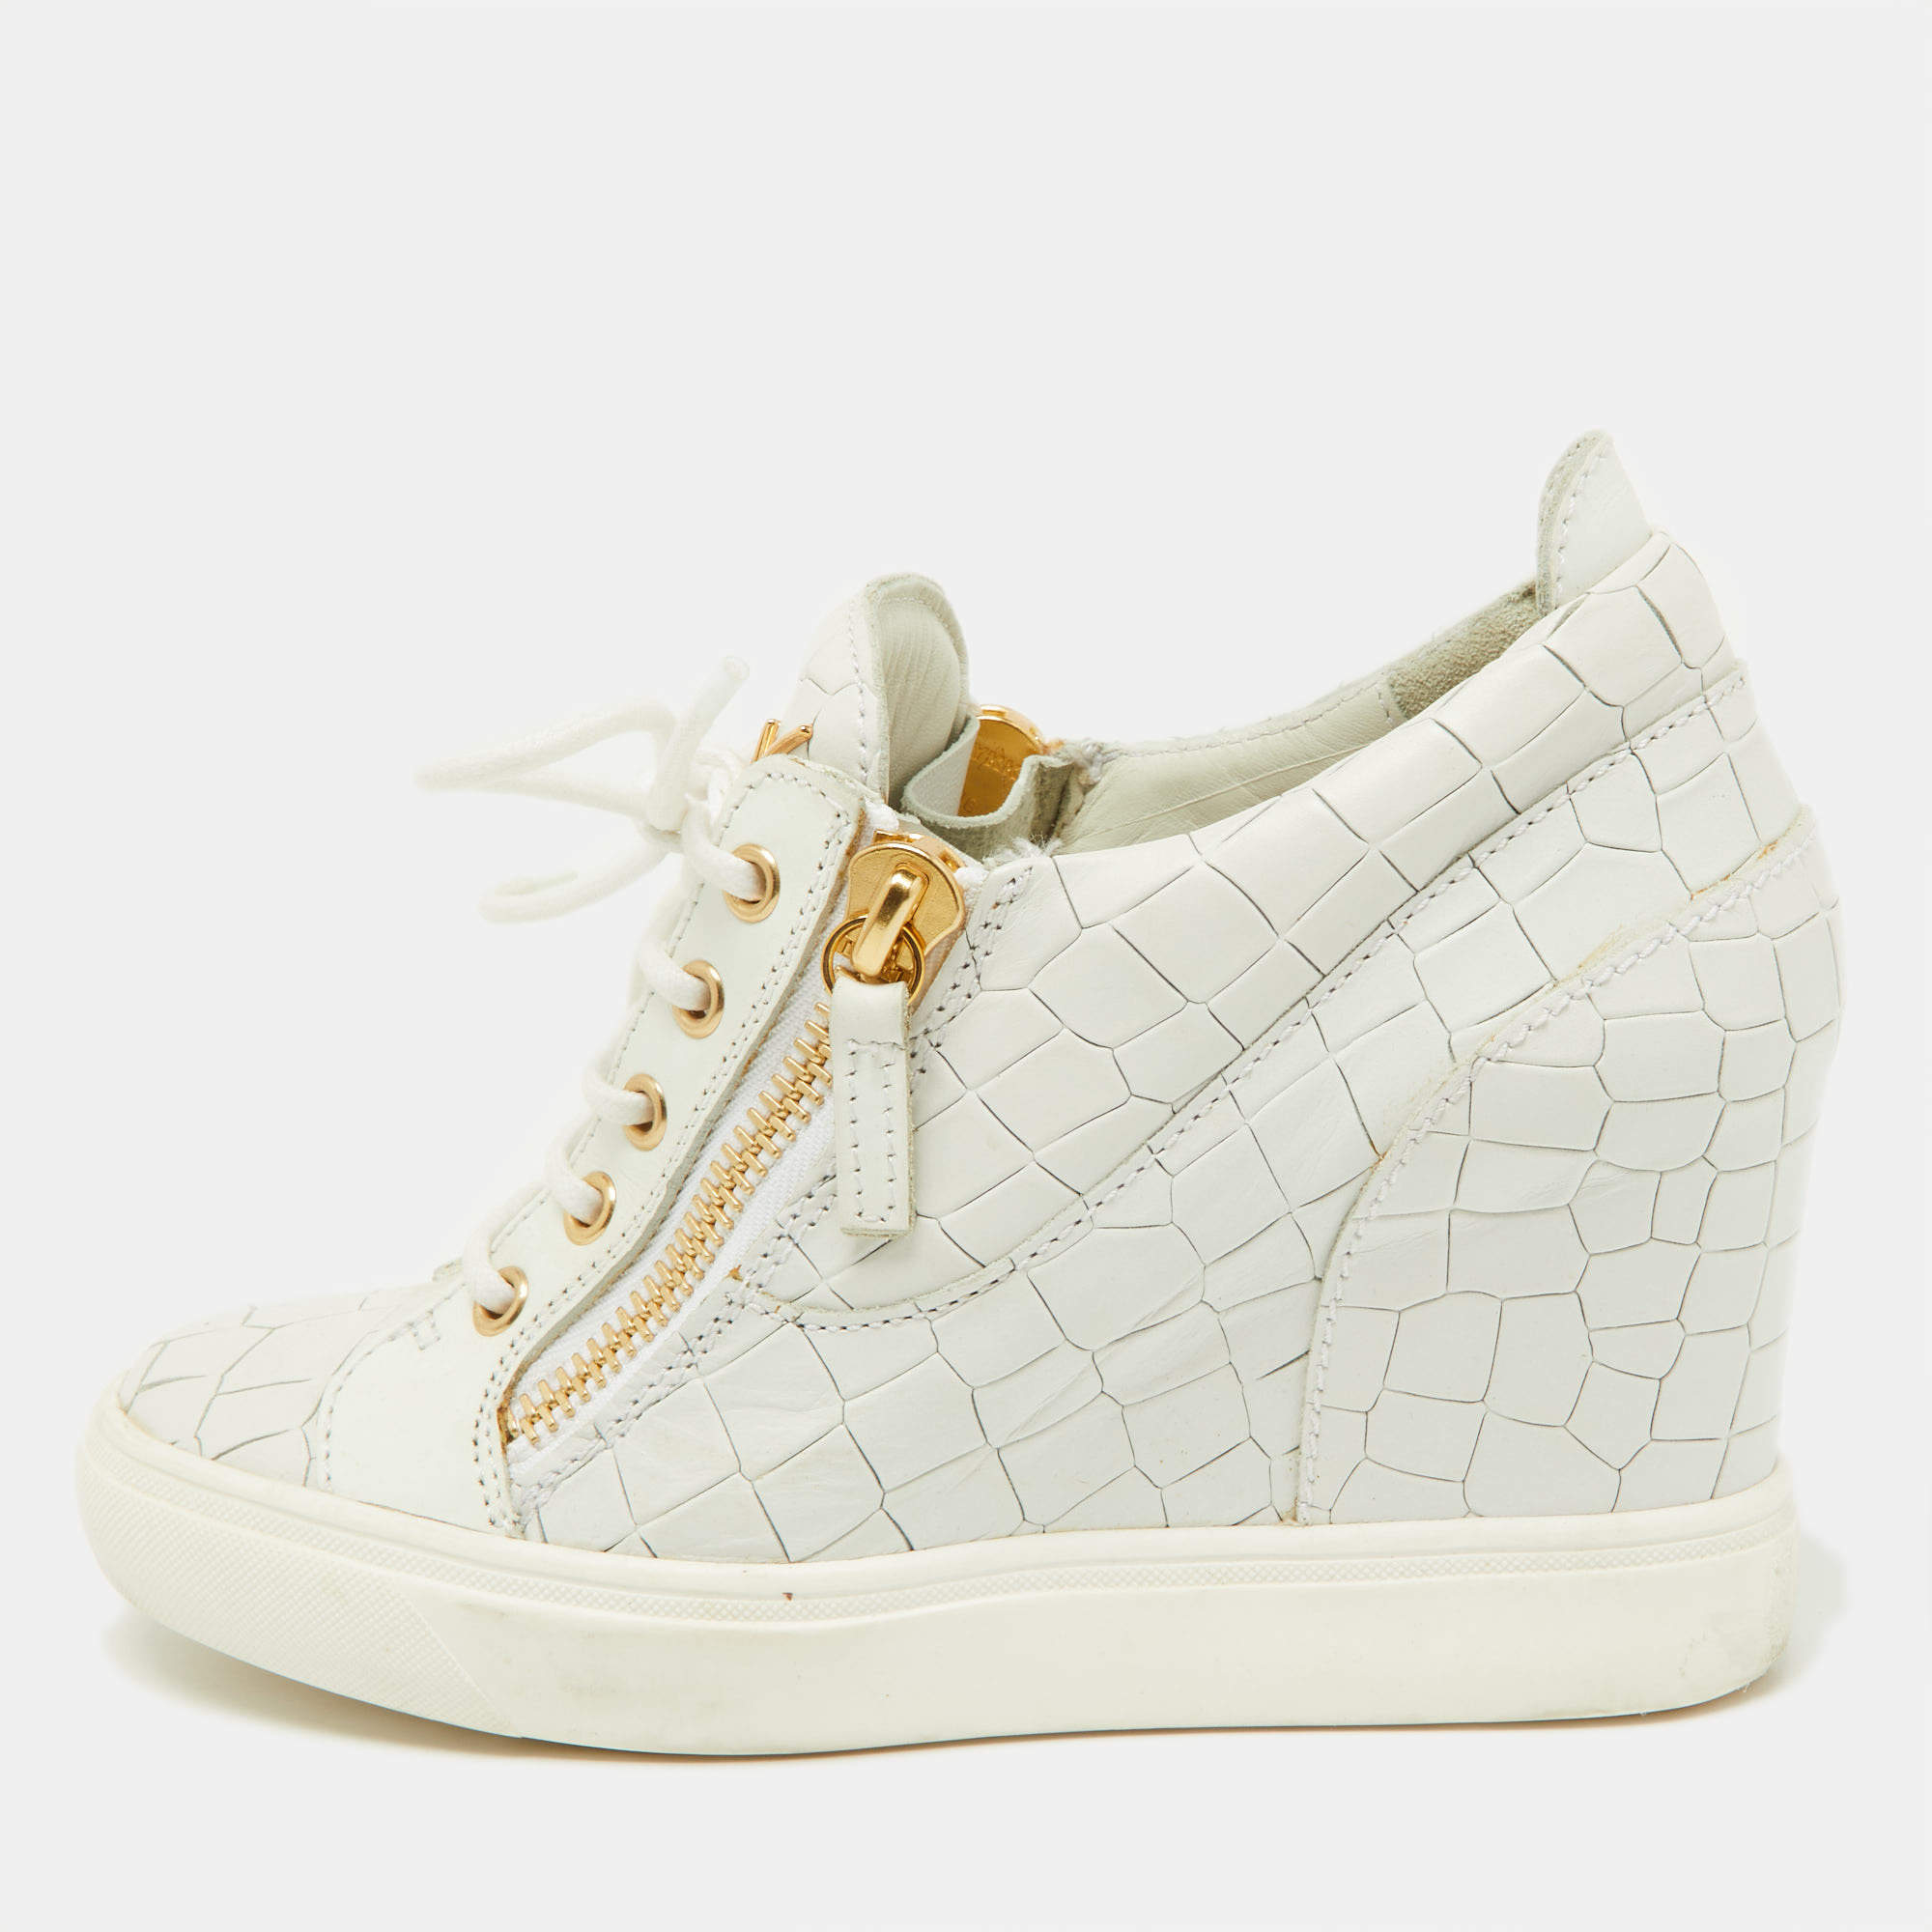 Giuseppe Zanotti White Croc Embossed Leather Wedge Sneakers Size 37.5